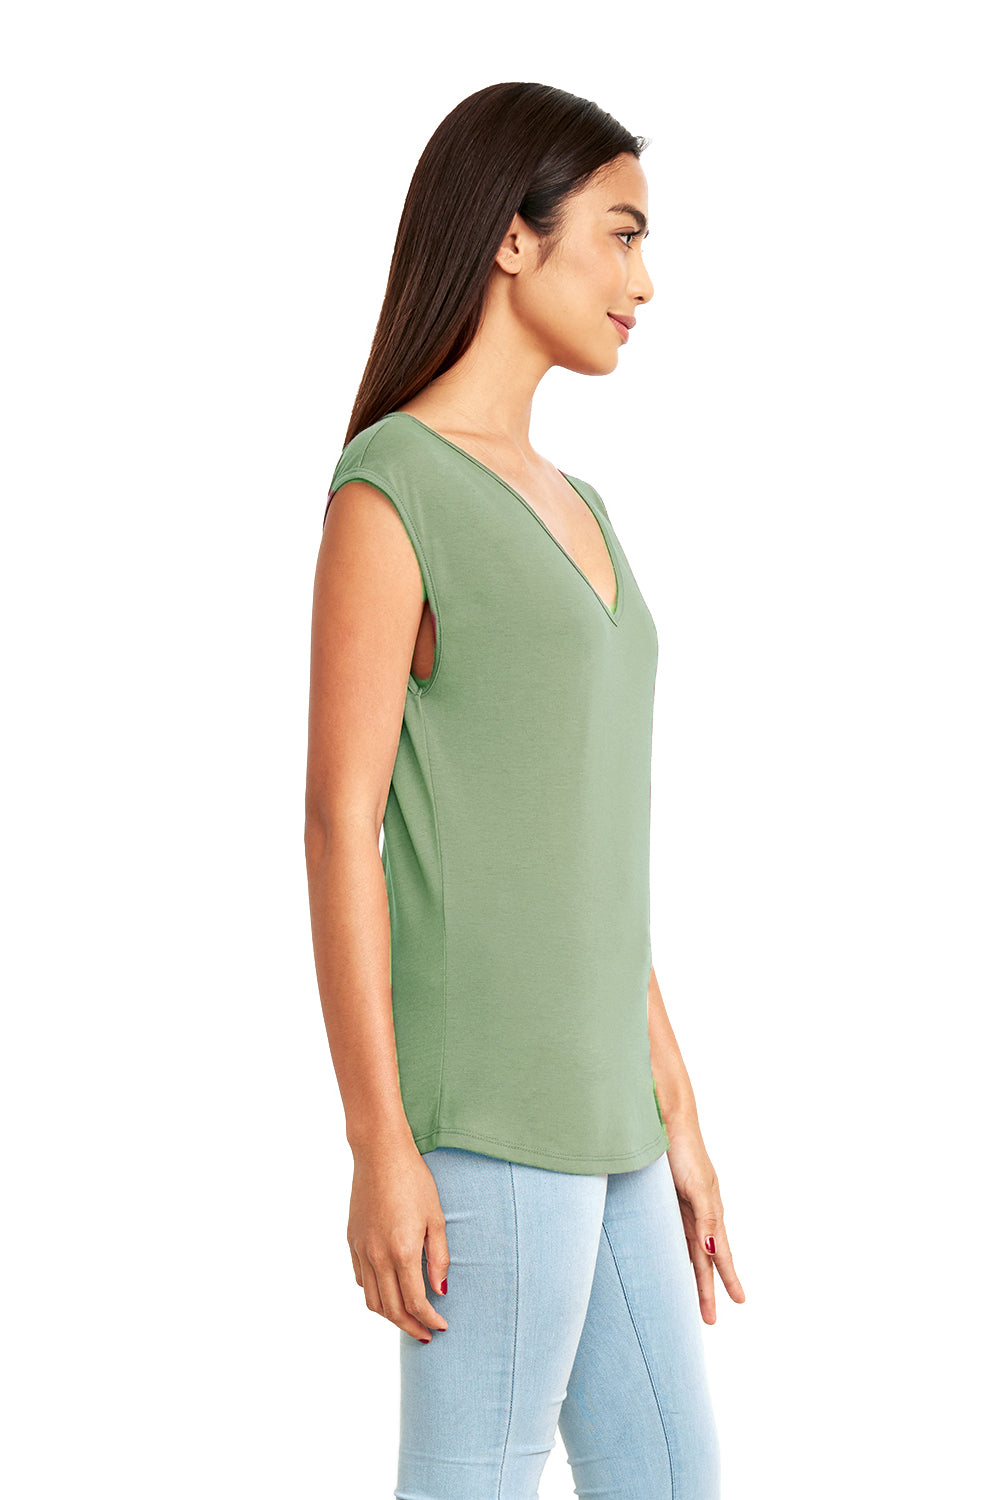 Next Level N5040 Womens Festival Tank Top Stonewashed Green Side